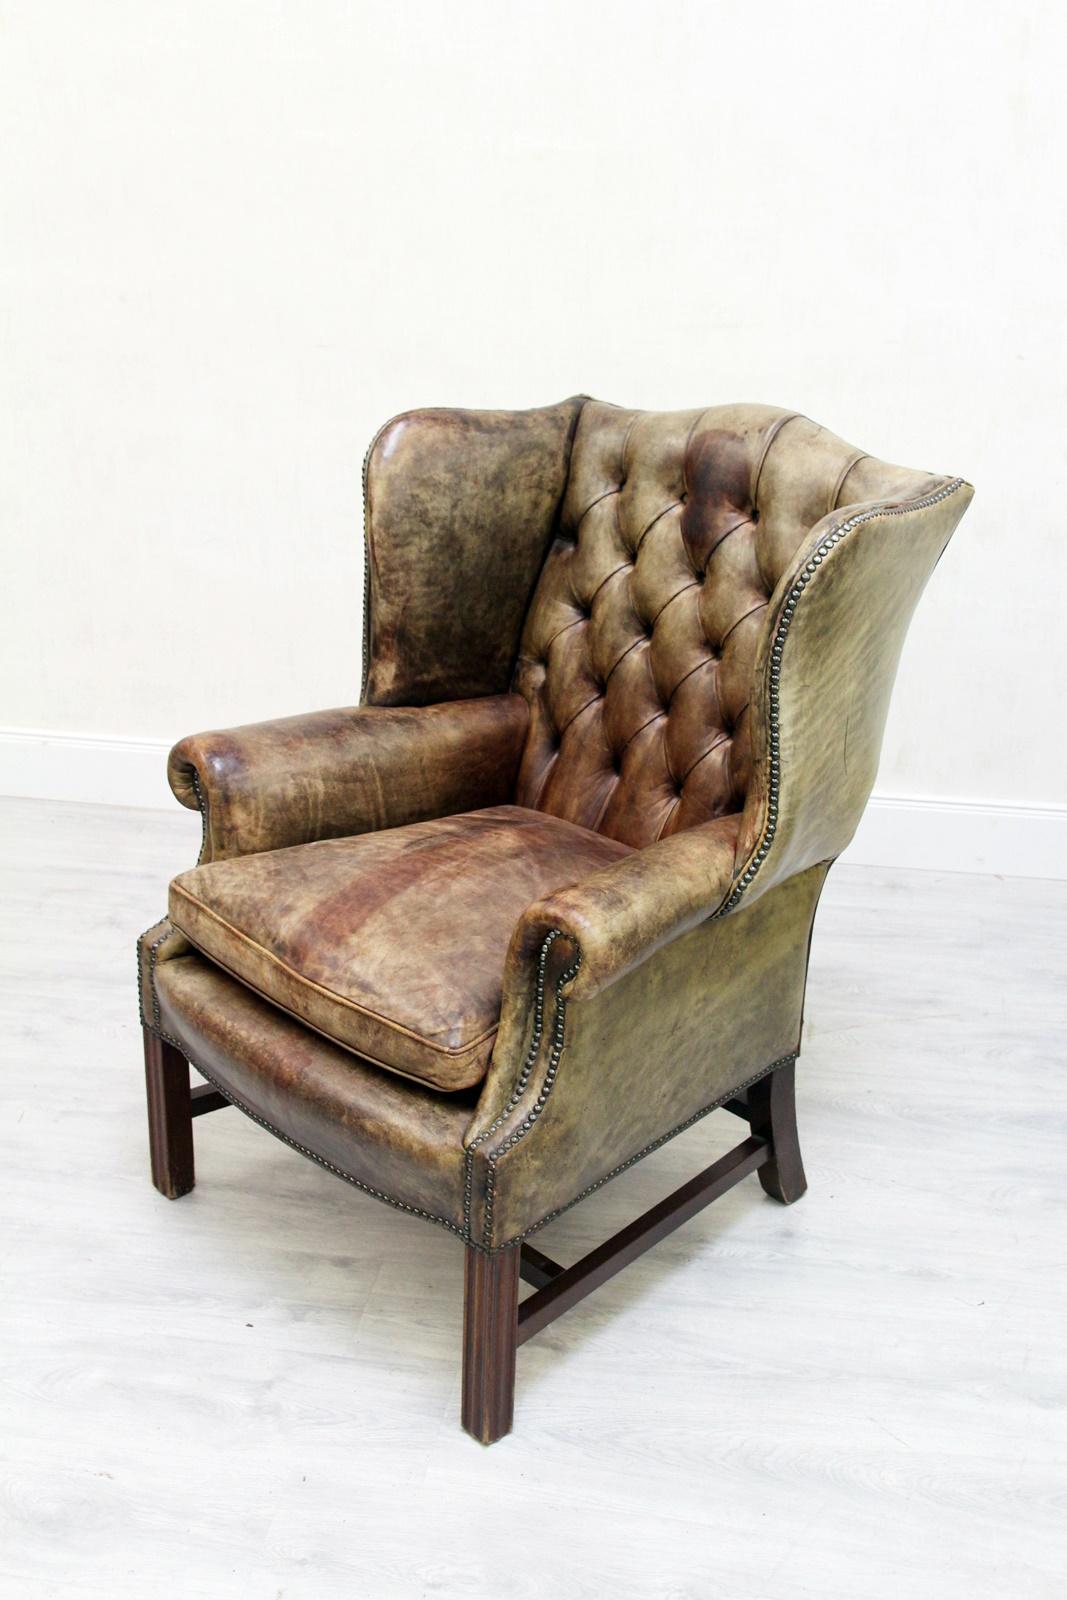 2-Chesterfield Armchair Armchair Wing Chair Antique Chair im Angebot 2